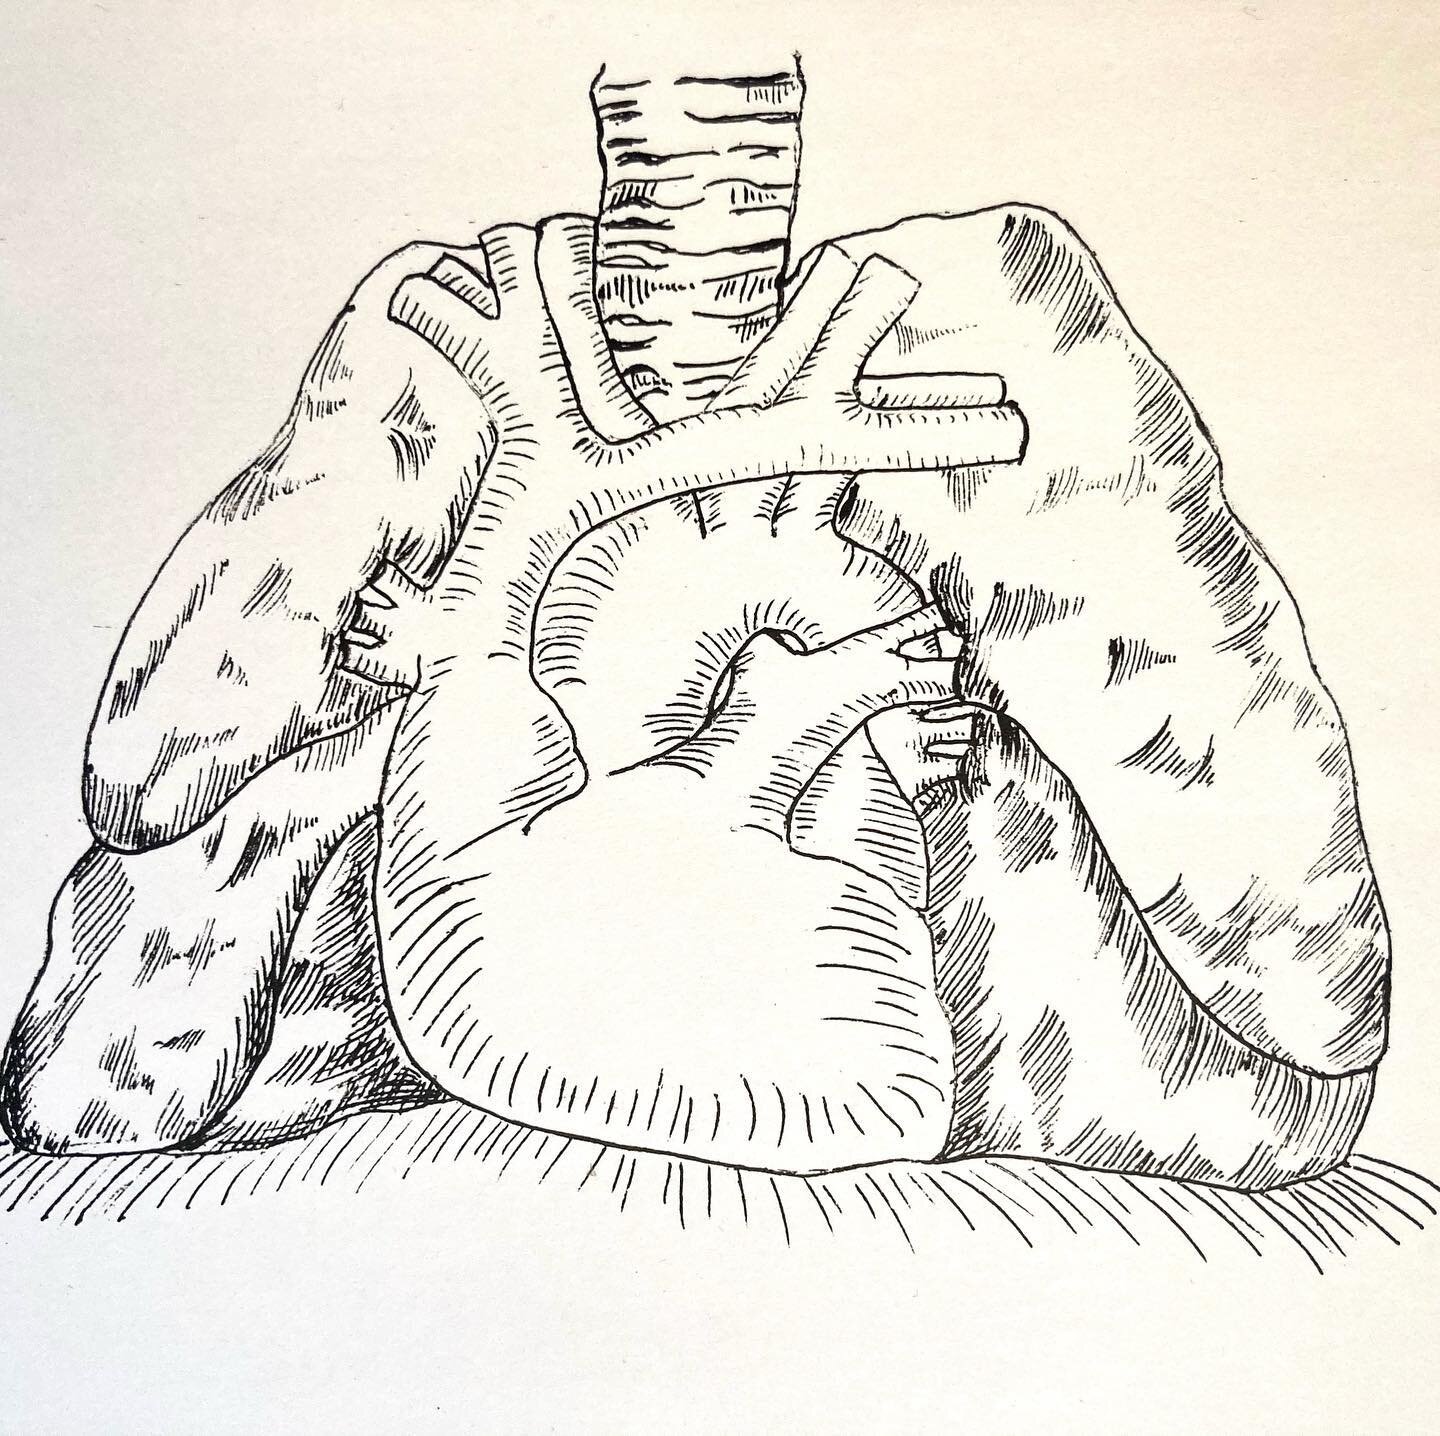 Found a folder of anatomy art I did in 1994/1995 for advertising. This was for a heart and lungs workshop I co-taught with Sara White when we had a business called Experiential Anatomy teaching Body-Mind Centering classes and workshops in the Boston 